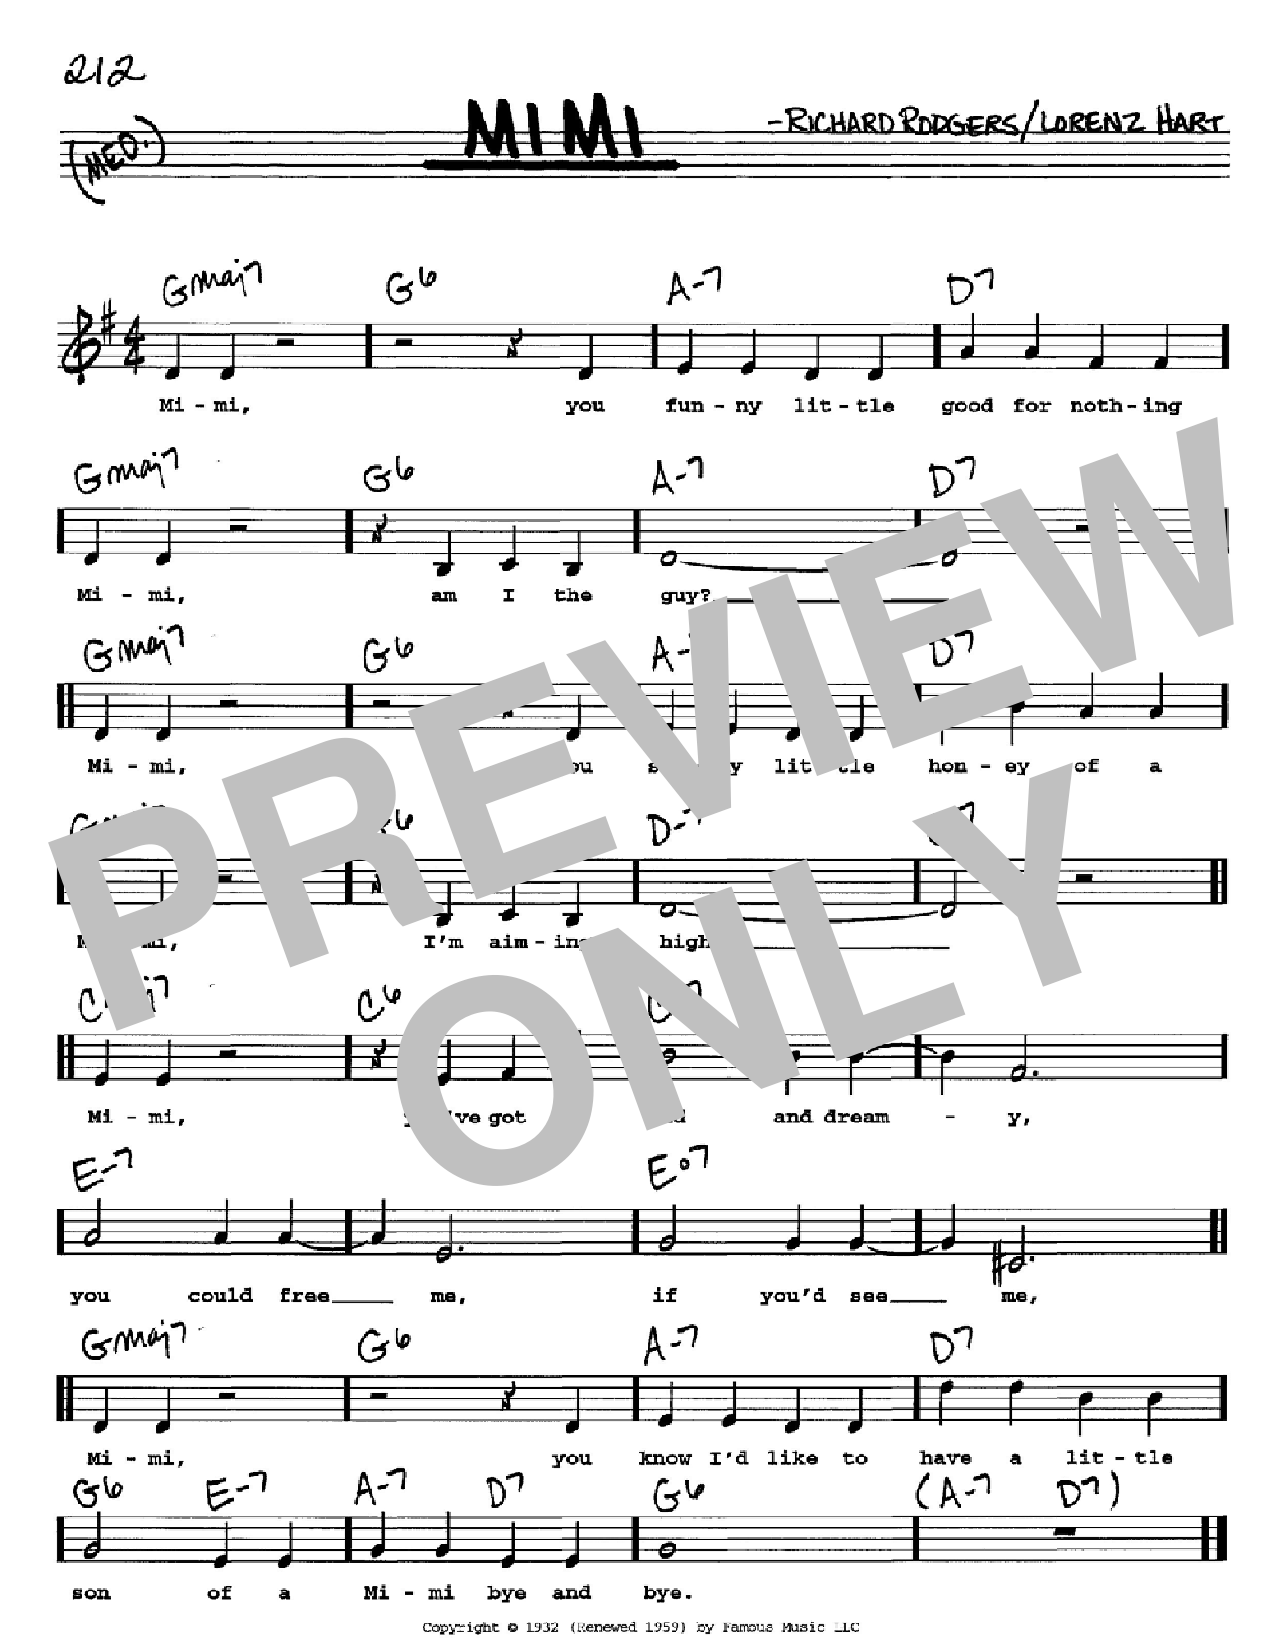 Download Rodgers & Hart Mimi Sheet Music